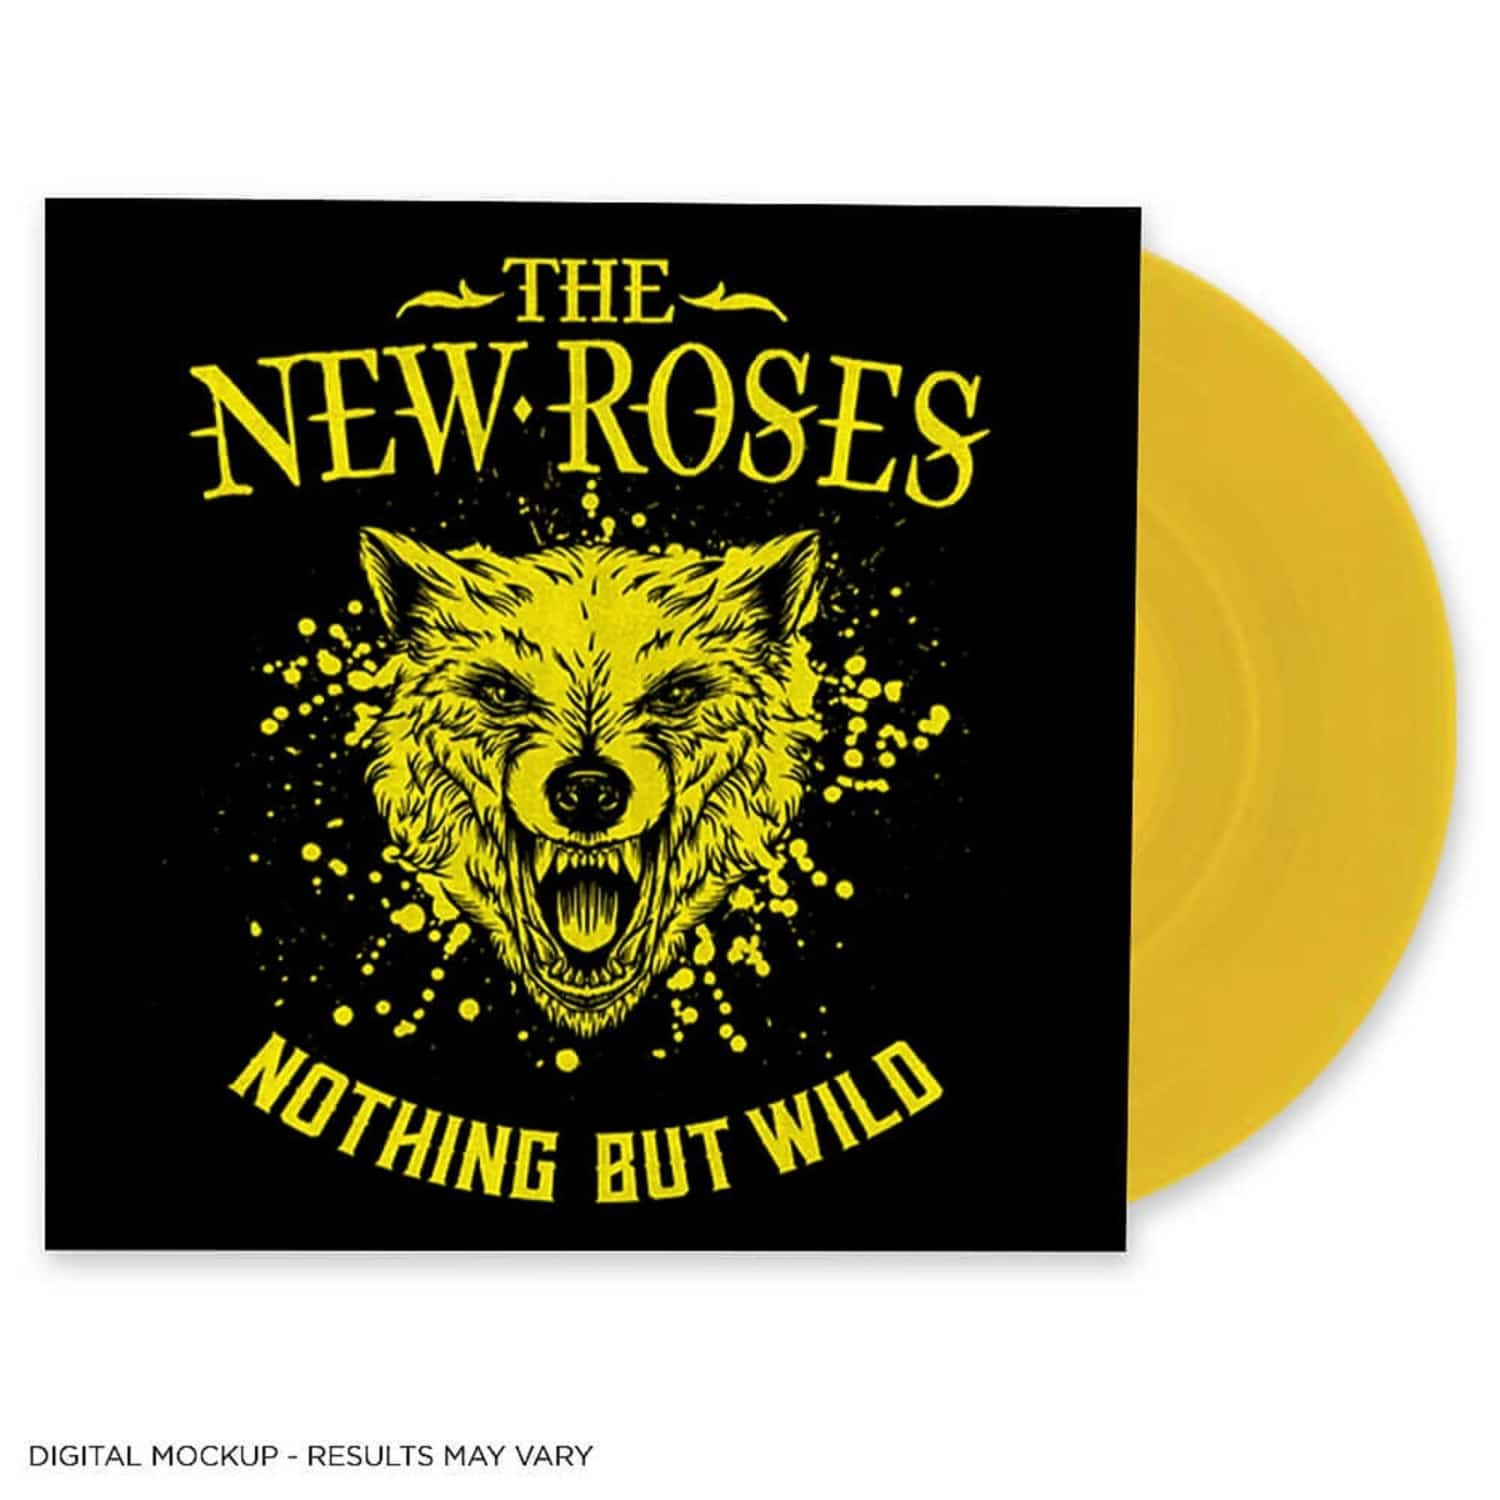 The New Roses - NOTHING BUT WILD 